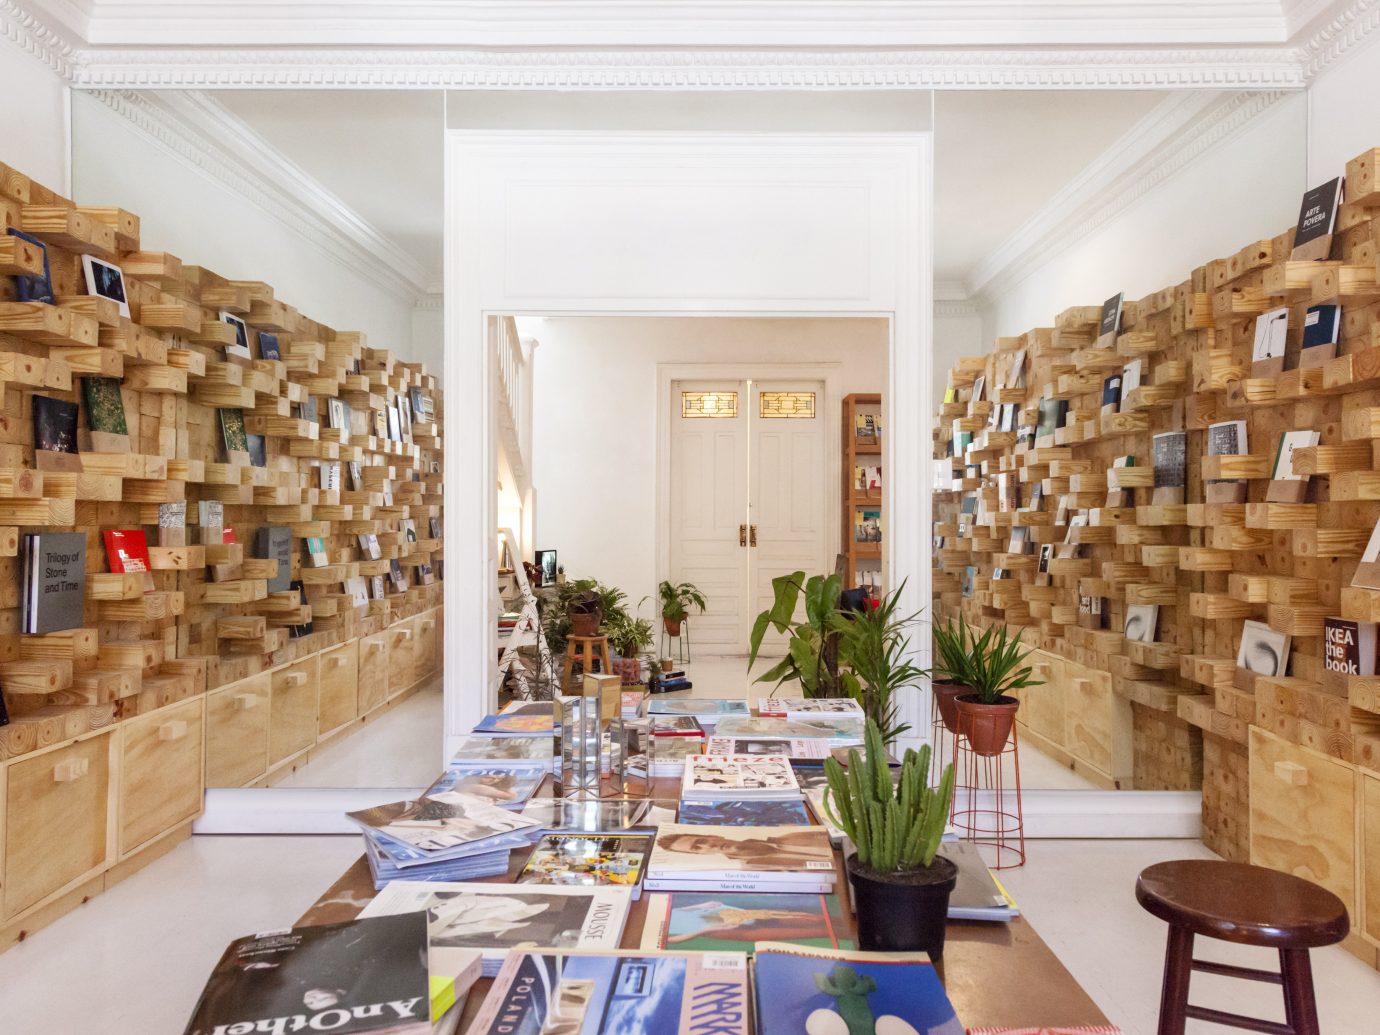 Interior of Casa Bosques in Mexico City with a table full of books and shelves on either sides of the walls